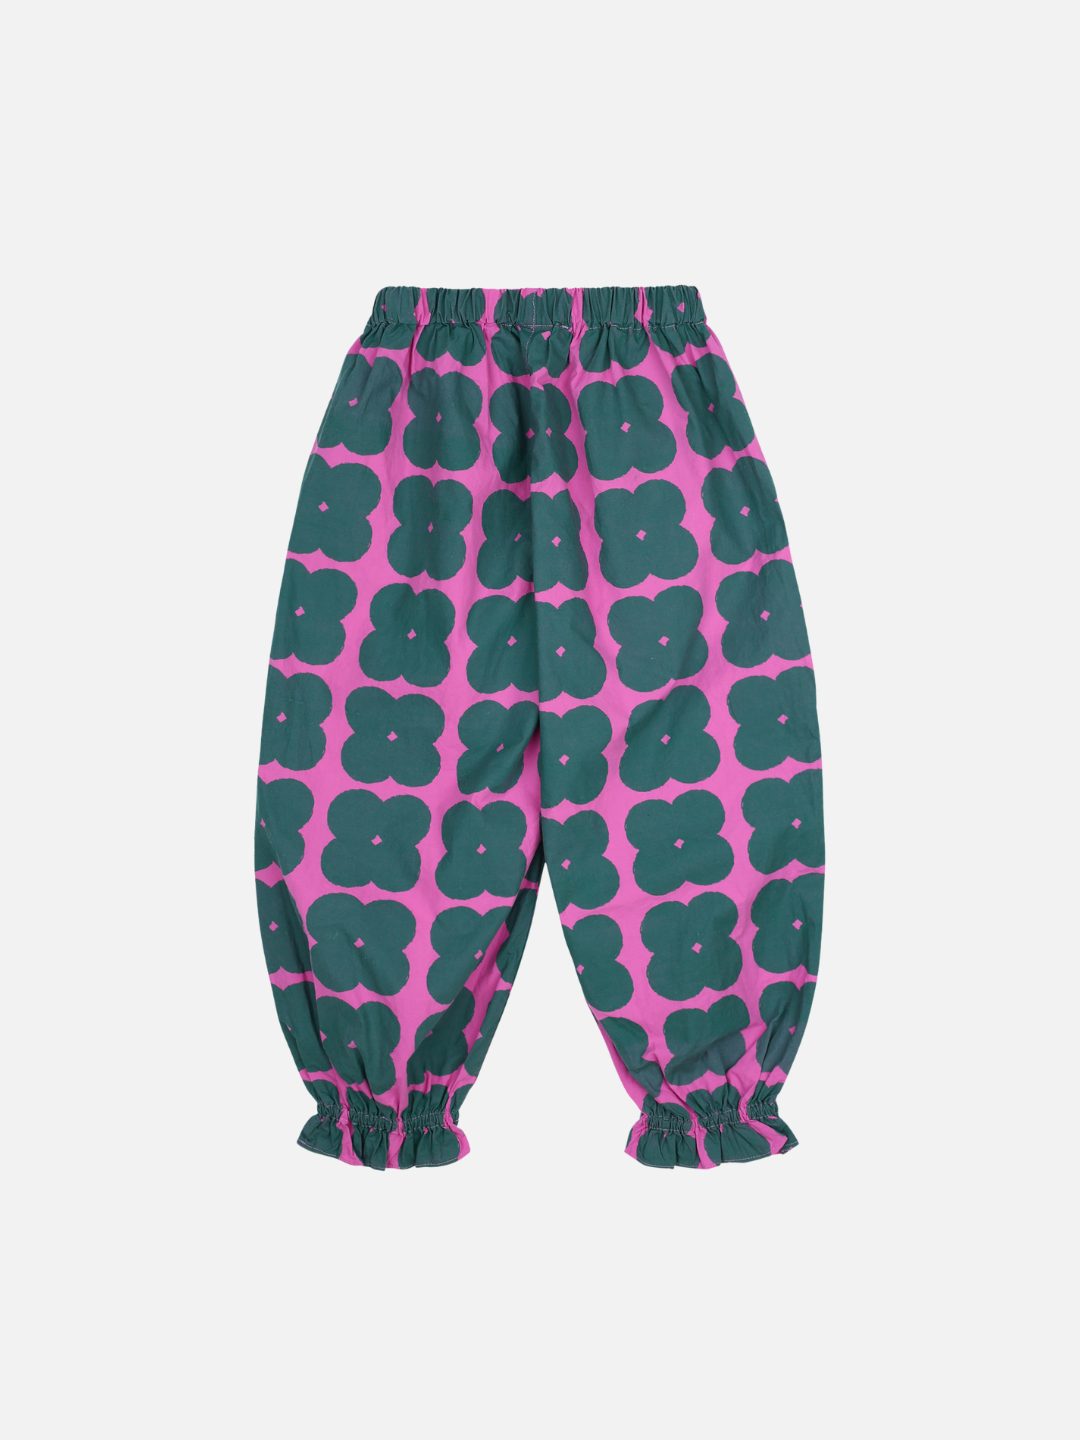 Back of Clover Pull-on Pants. Dark green clover shapes on a solid pink background. Cinched around the ankle and has an elastic waist.